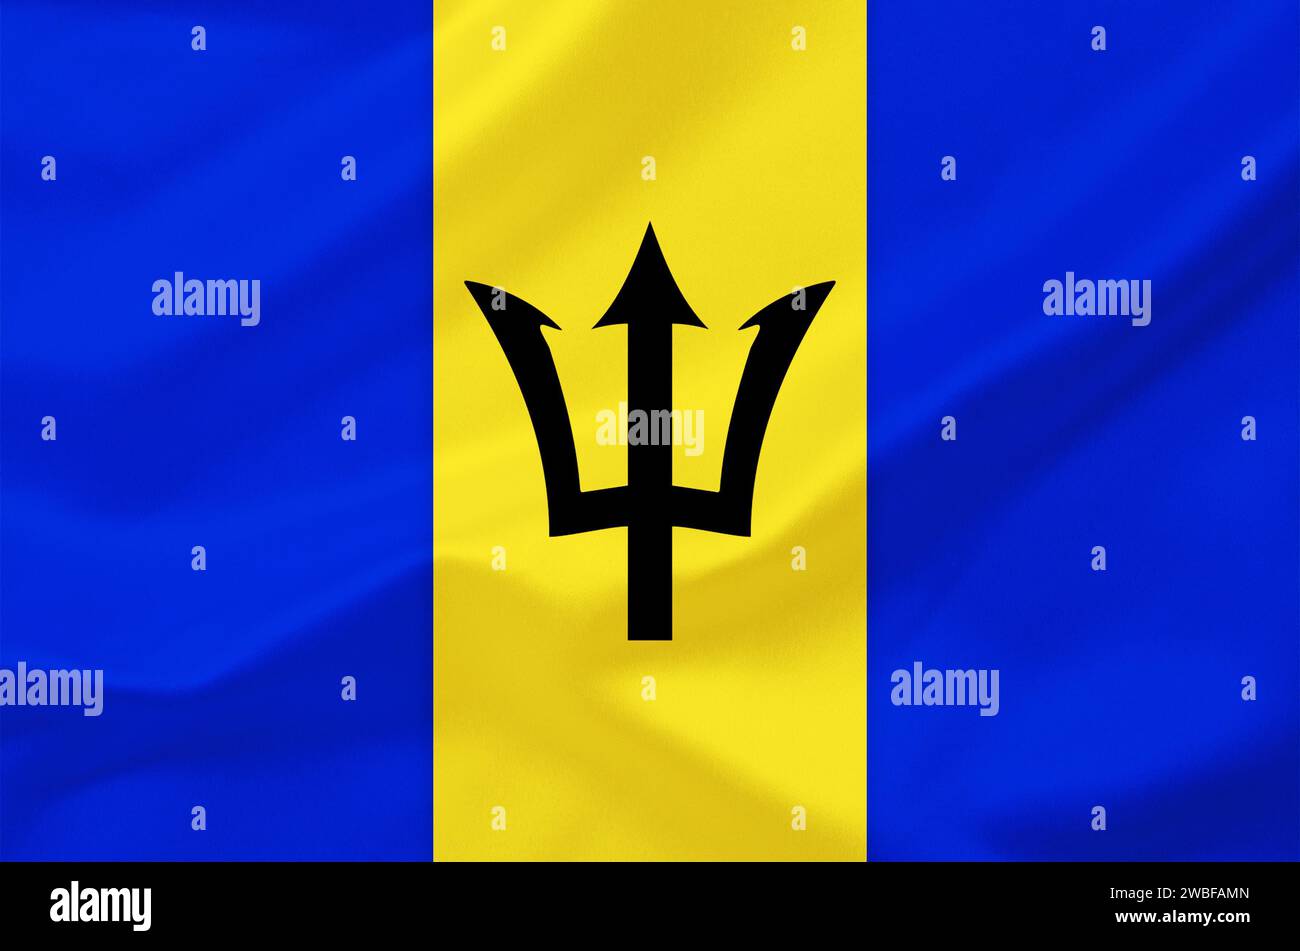 The flag of Barbados. Country in the Caribbean. Island state, island, Atlantic Ocean, Lesser Antilles, currency is the Barbados dollar. The capital Stock Photo